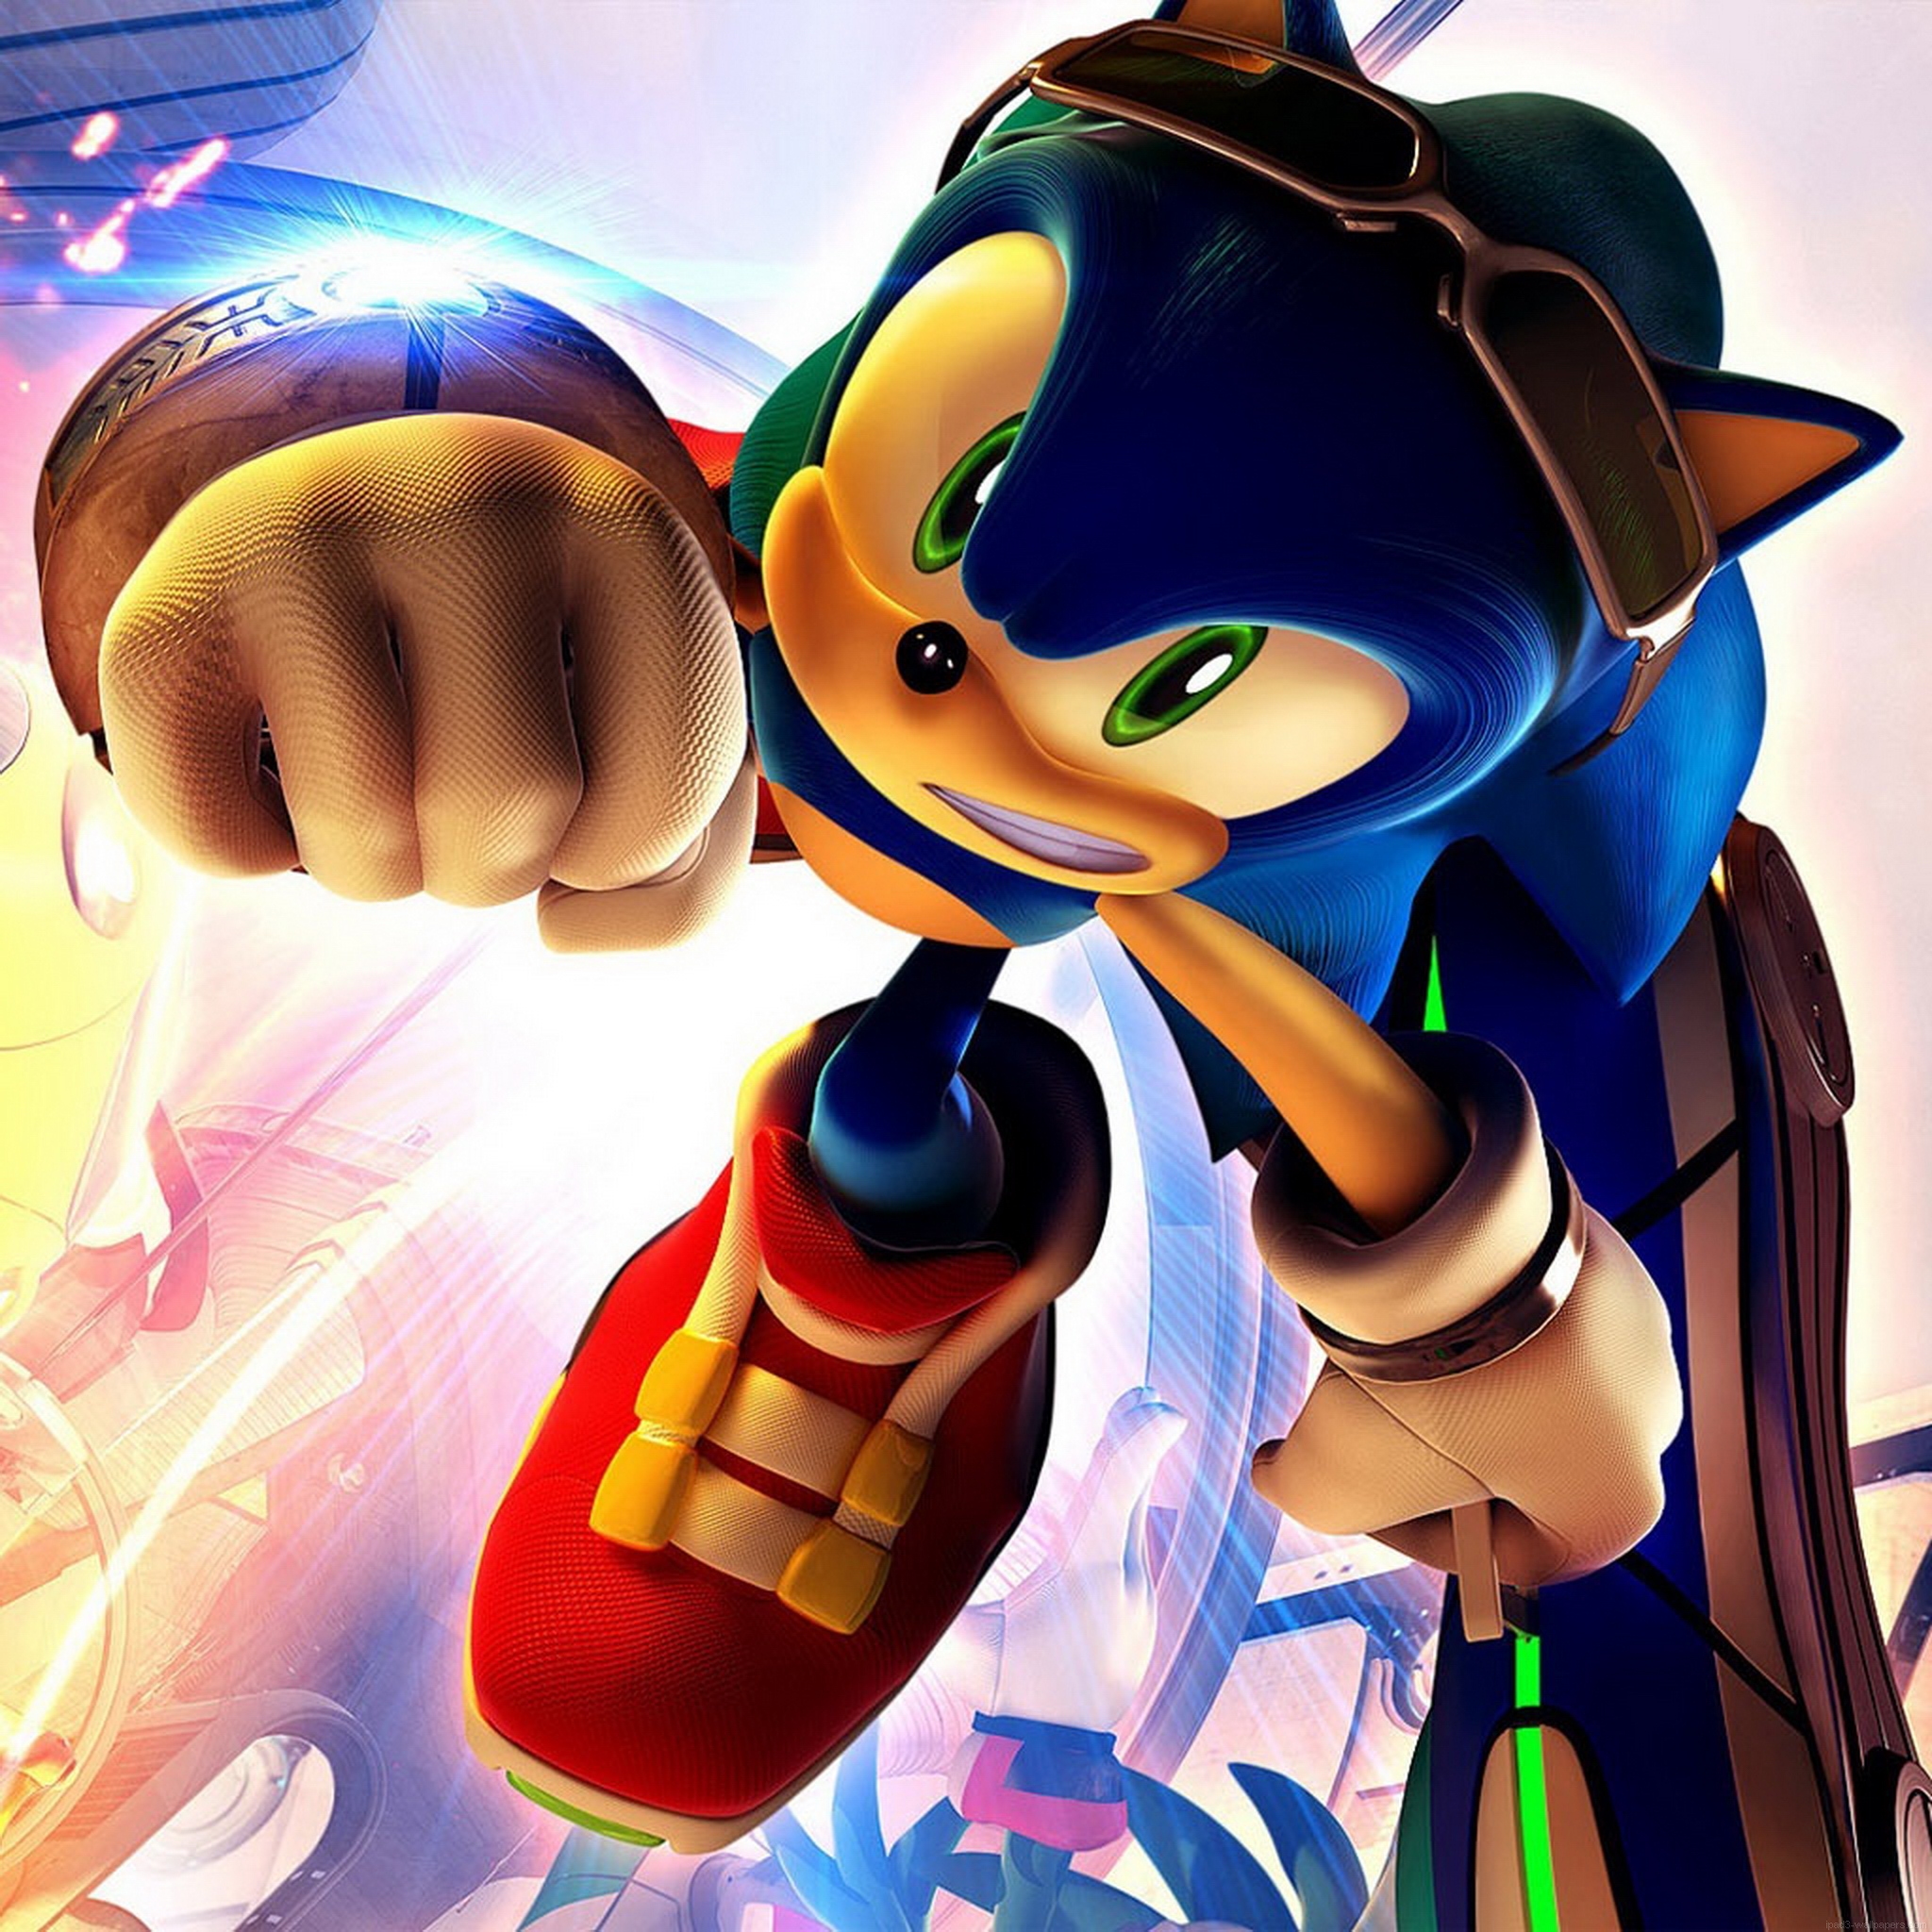 download sonic free riders wii for free